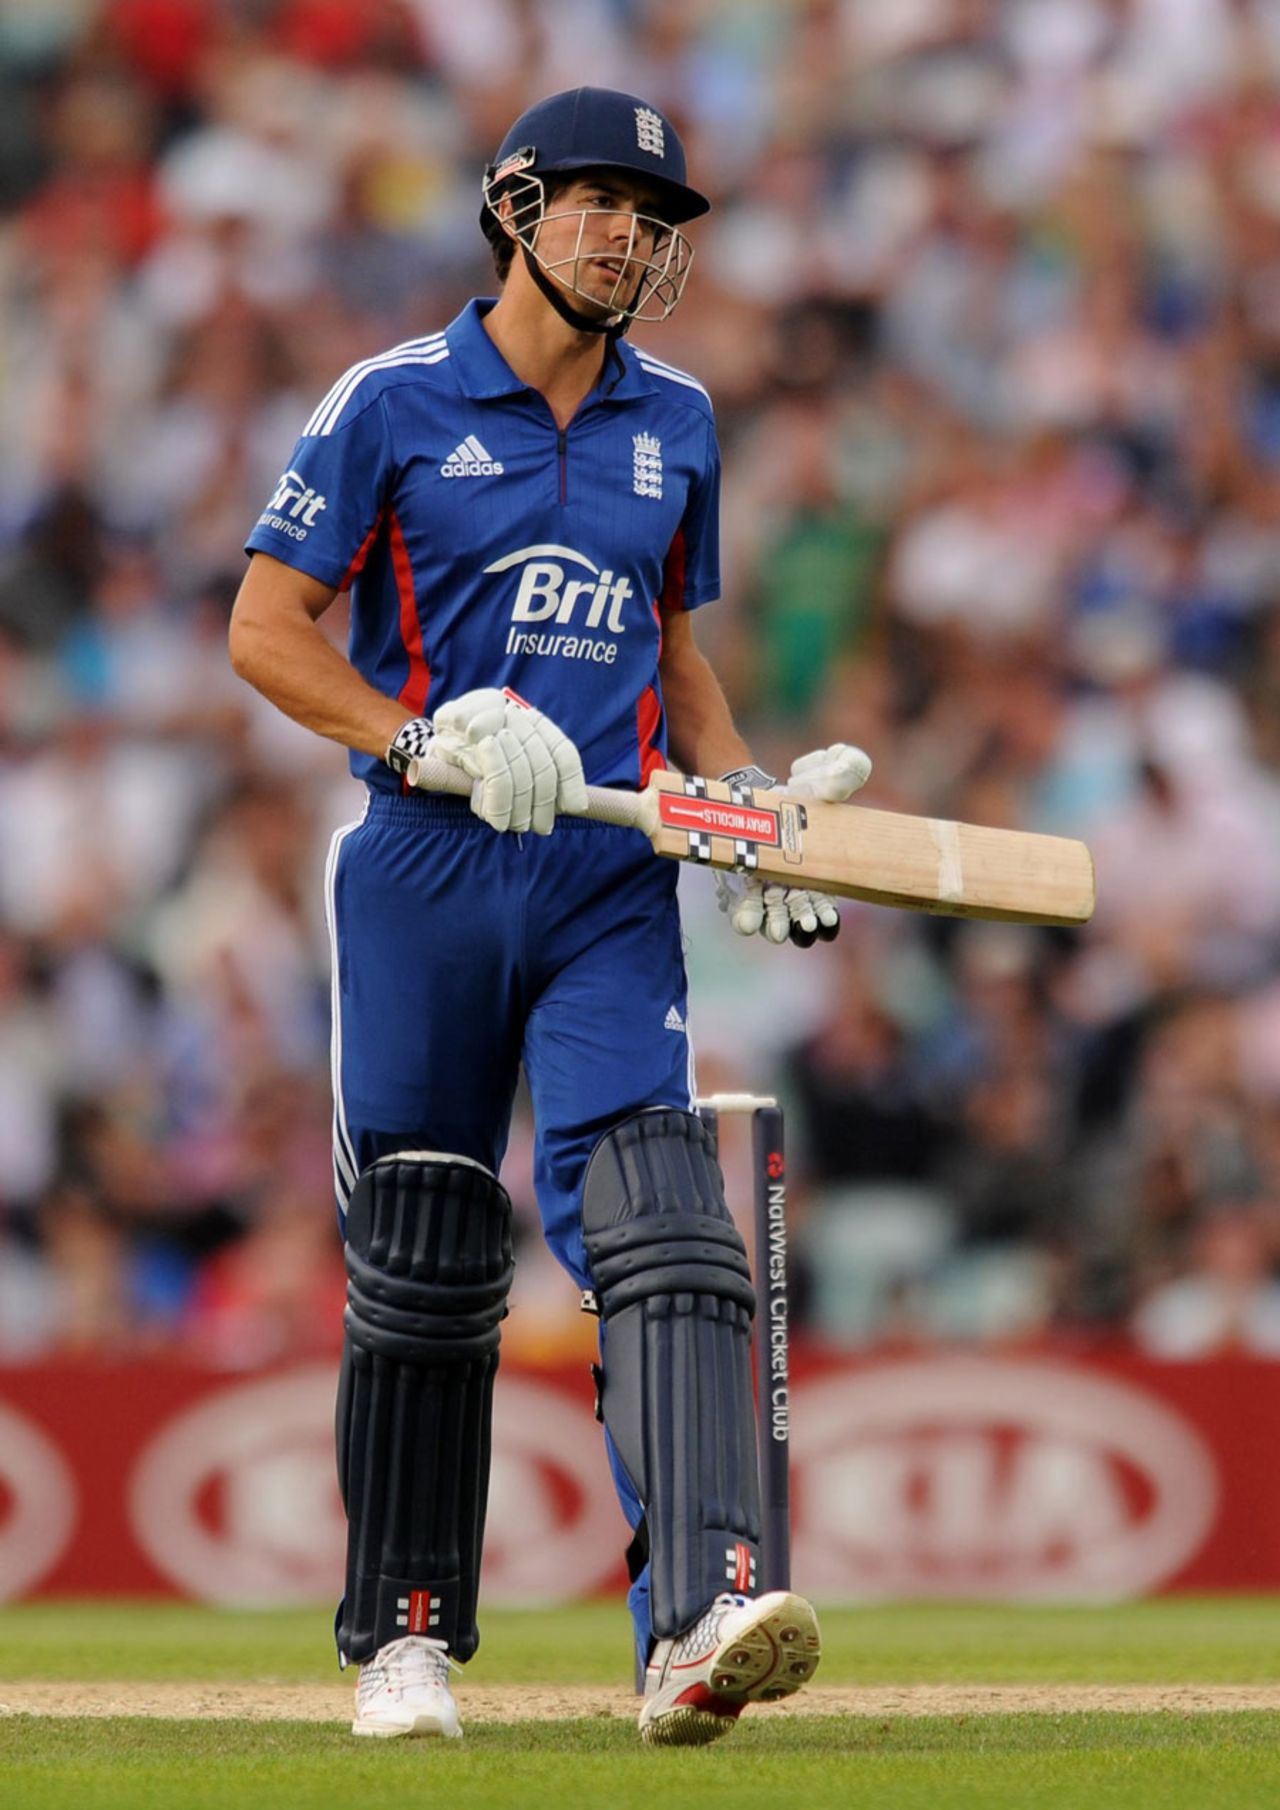 Alastair Cook departs after making a painstaking 20, England v South Africa, 3rd NatWest ODI, The Oval, August 31, 2012